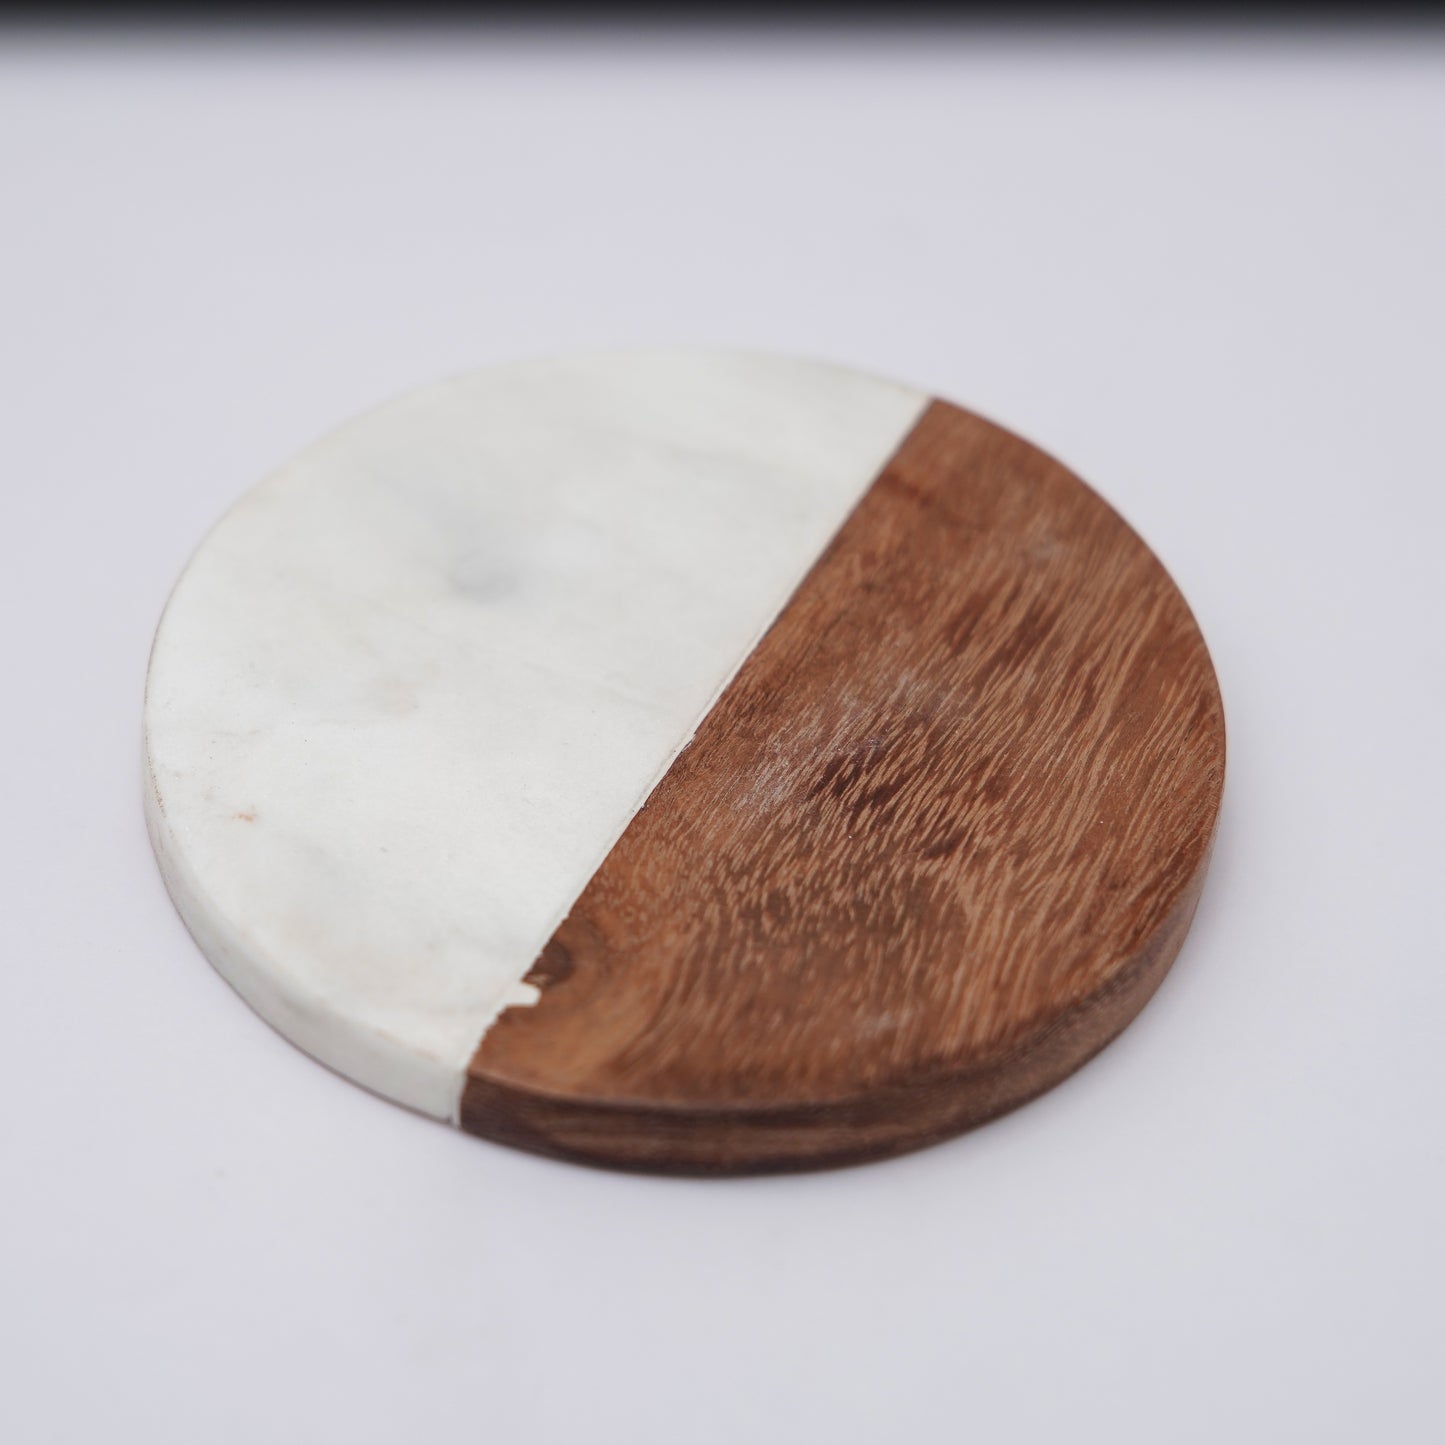 Marble and Wood Coaster Set of 4 for Tea Coffee Cocktail Handmade Marble Coaster for Hot & Cold Drinks Coaster for Dining Table Home and Office Round- White